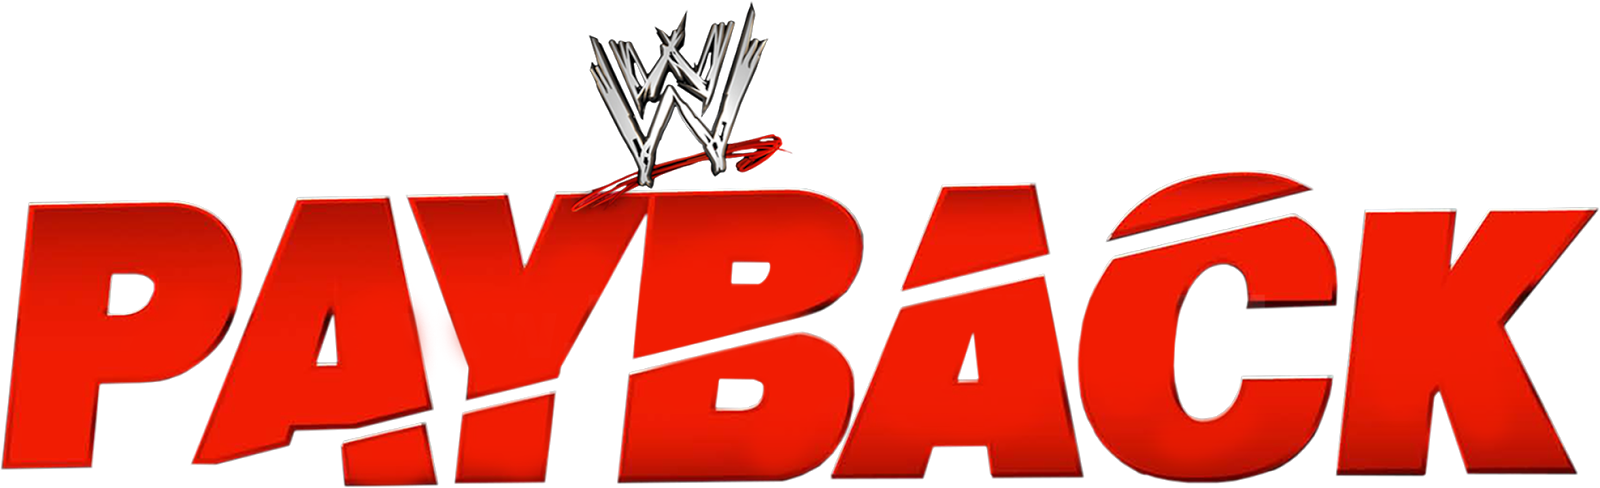 Archived: WWE Payback 2015 Predictions - archived